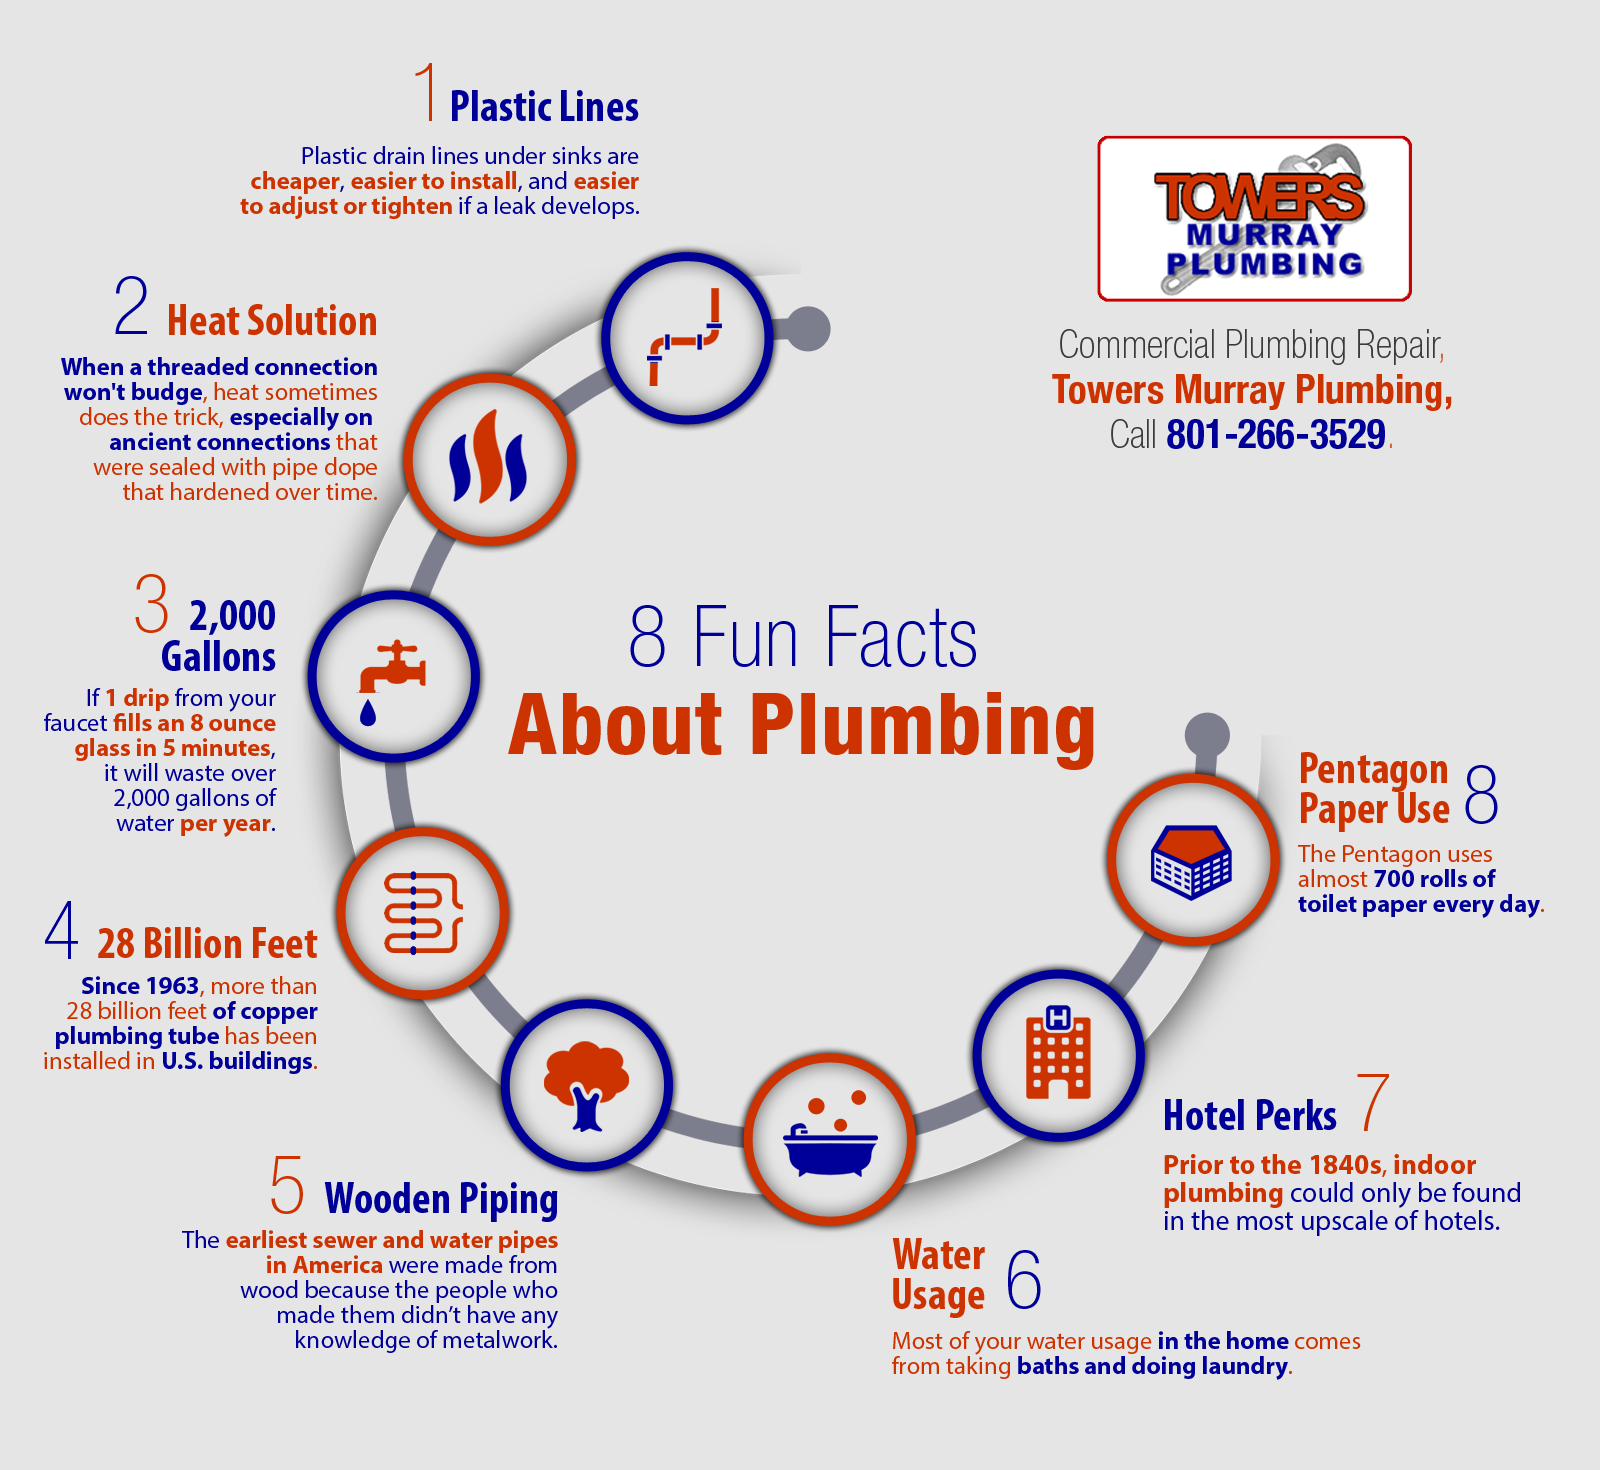 8 Interesting Facts About Plumbing Shared Info Graphics